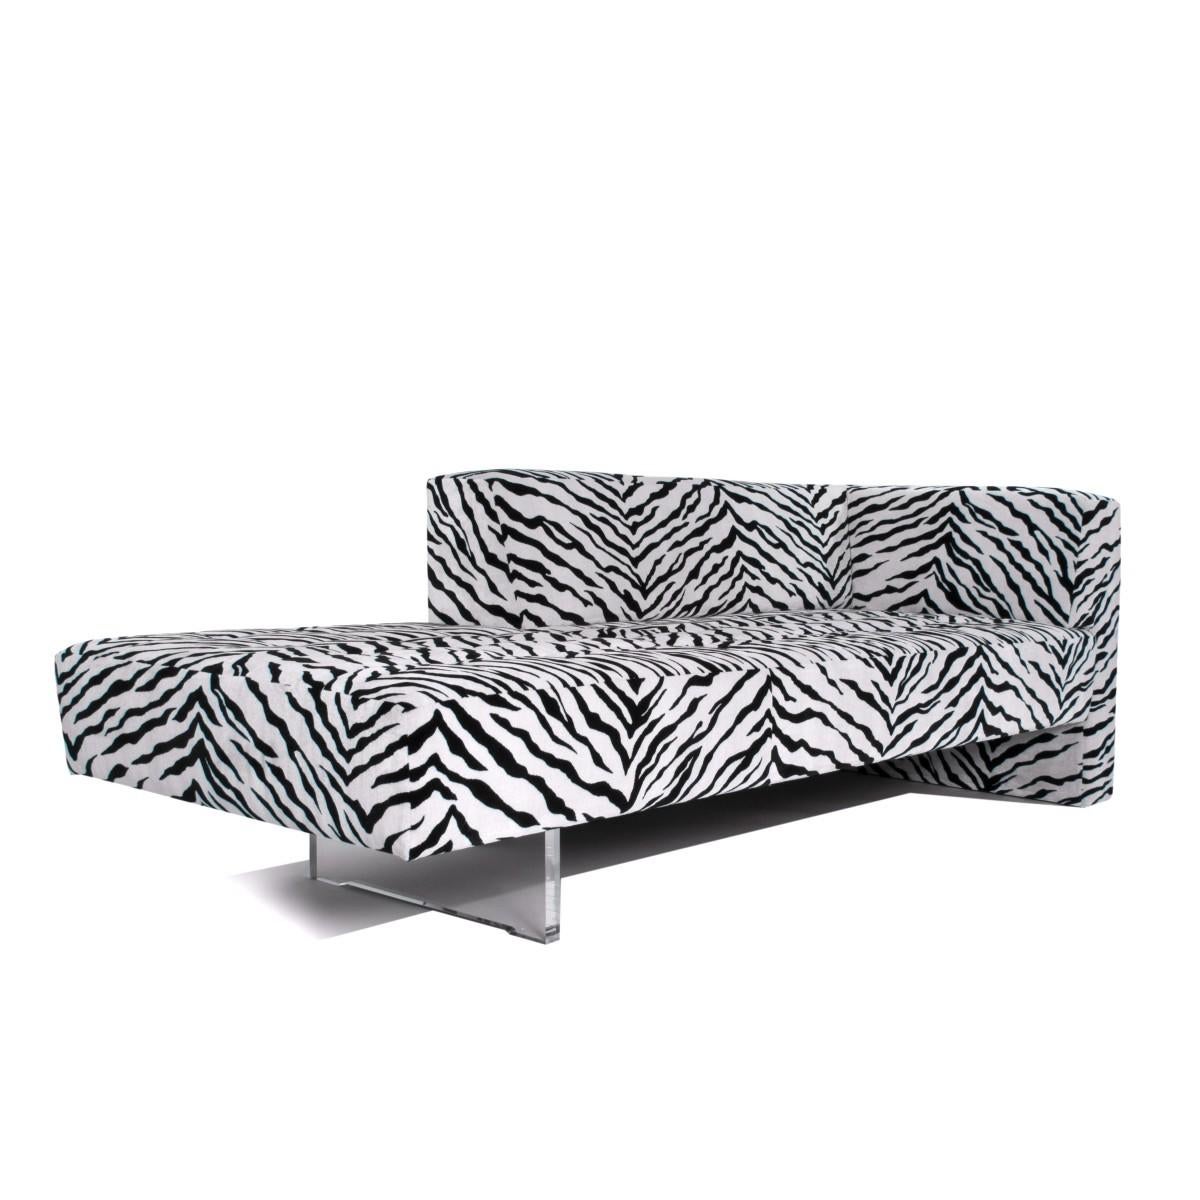 The Omnibus chaise lounge by Vladimir Kagan in COM / COL. USA, circa 1980. Features upholstered seat with signature Lucite base. Price includes Labor / custom reupholstery in Client's Own Material (COM) or Client's Own Leather (COL). Please allow 4